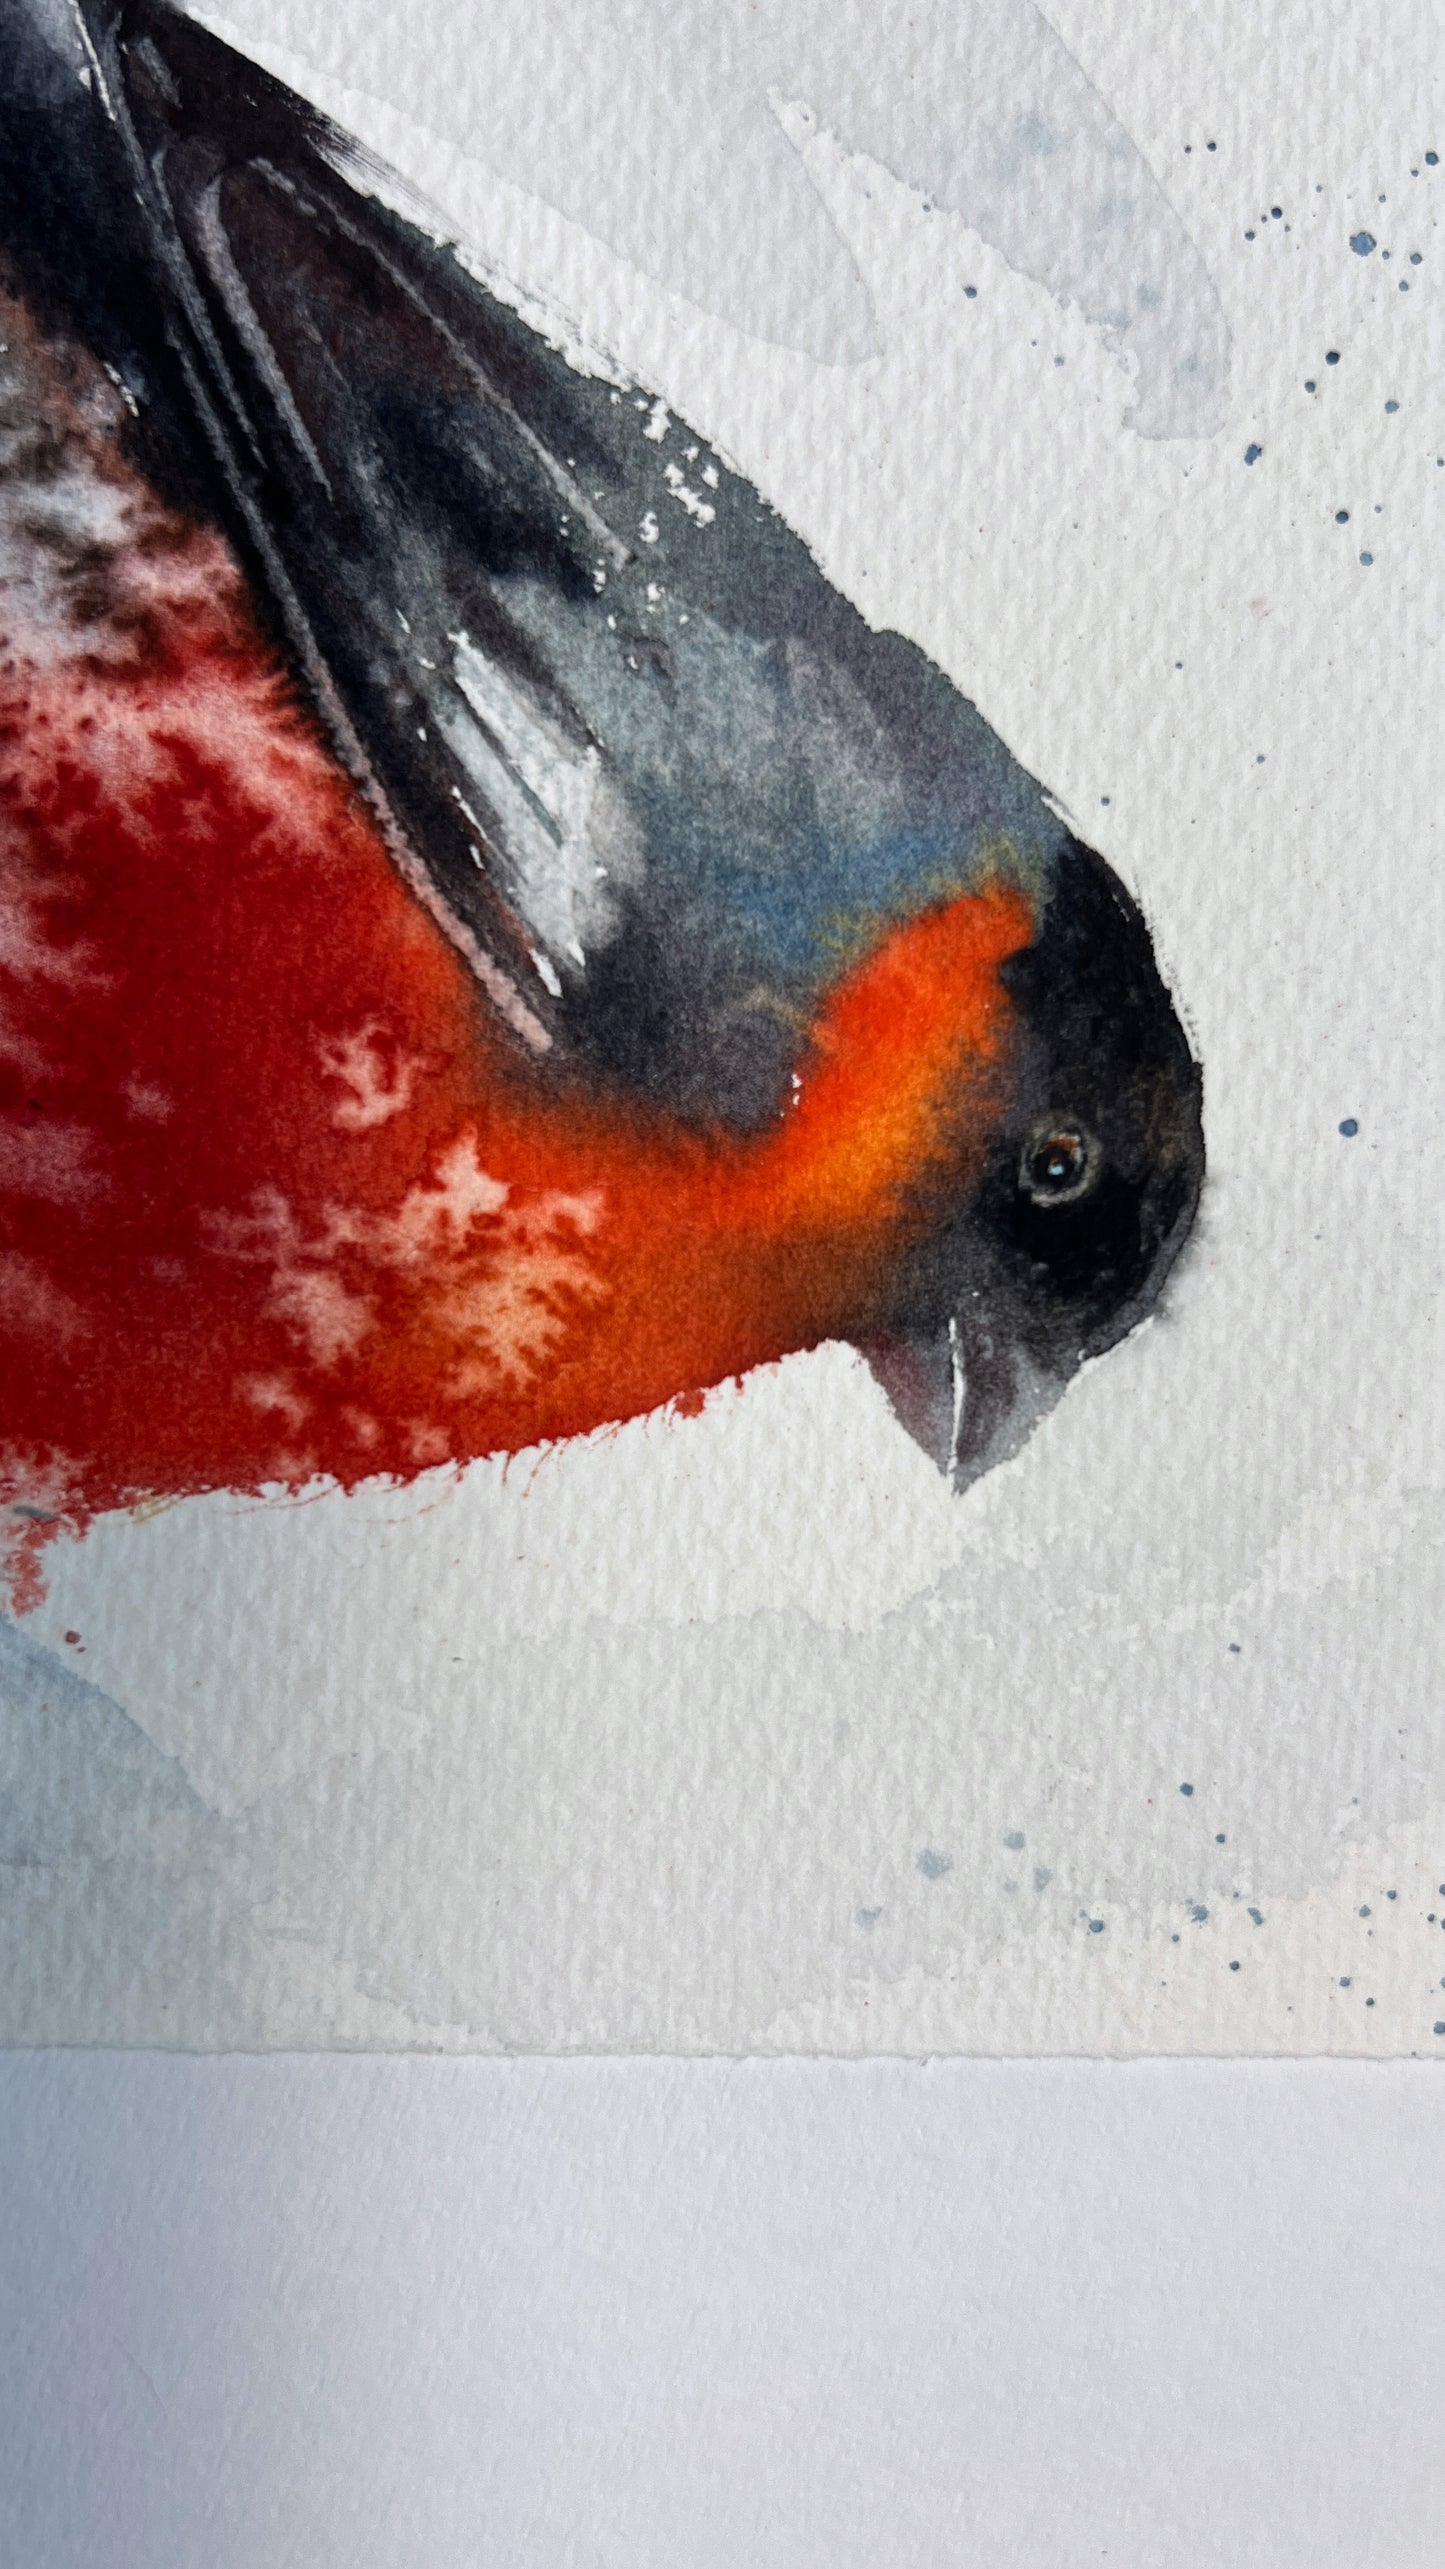 Bullfinch Painting, Original Watercolor Bird Art, Perfect for Home Decor, Unique Gift for Bird Lovers